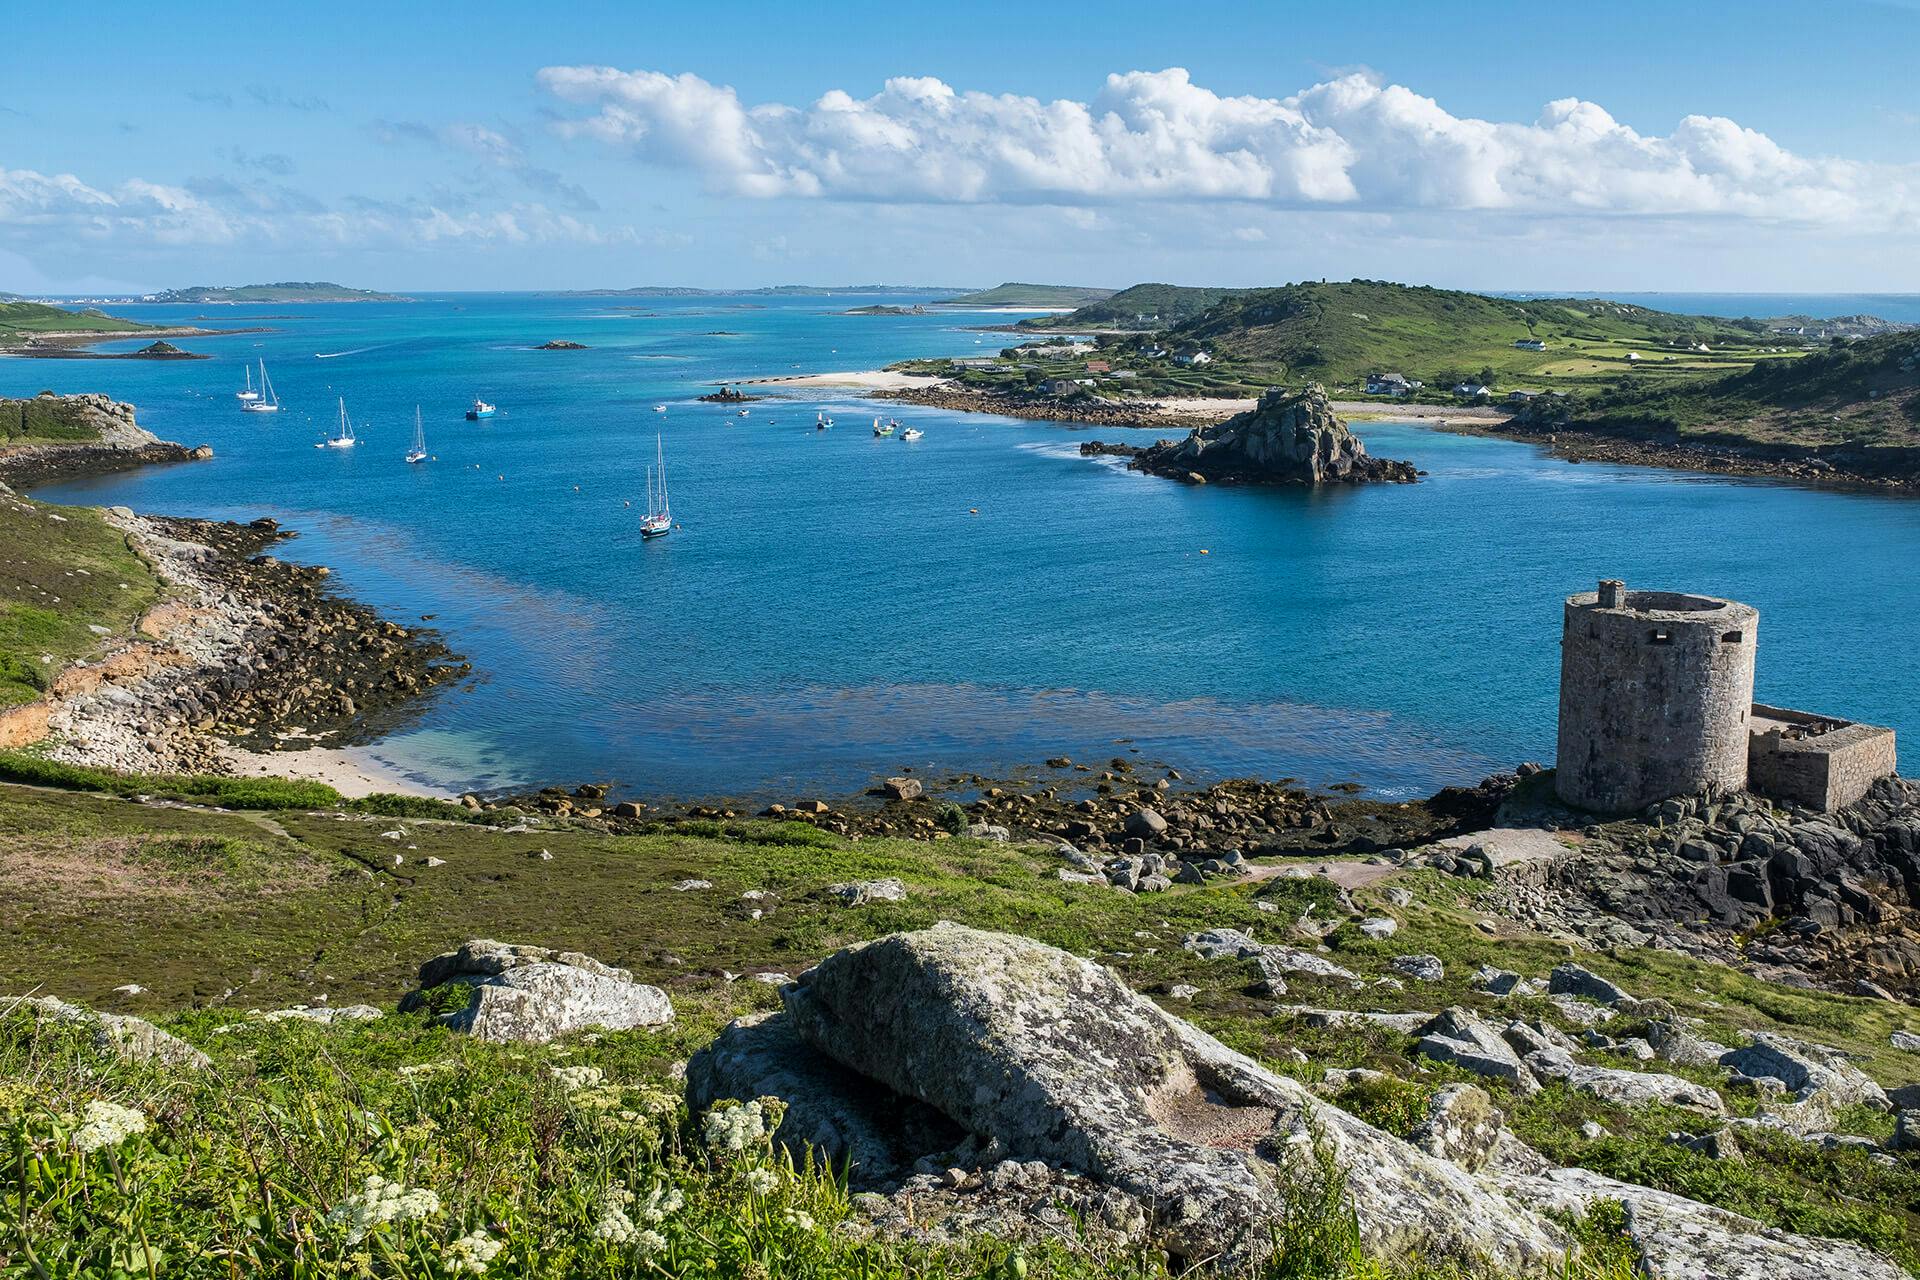 A view from Tresco on the Isles of Scilly